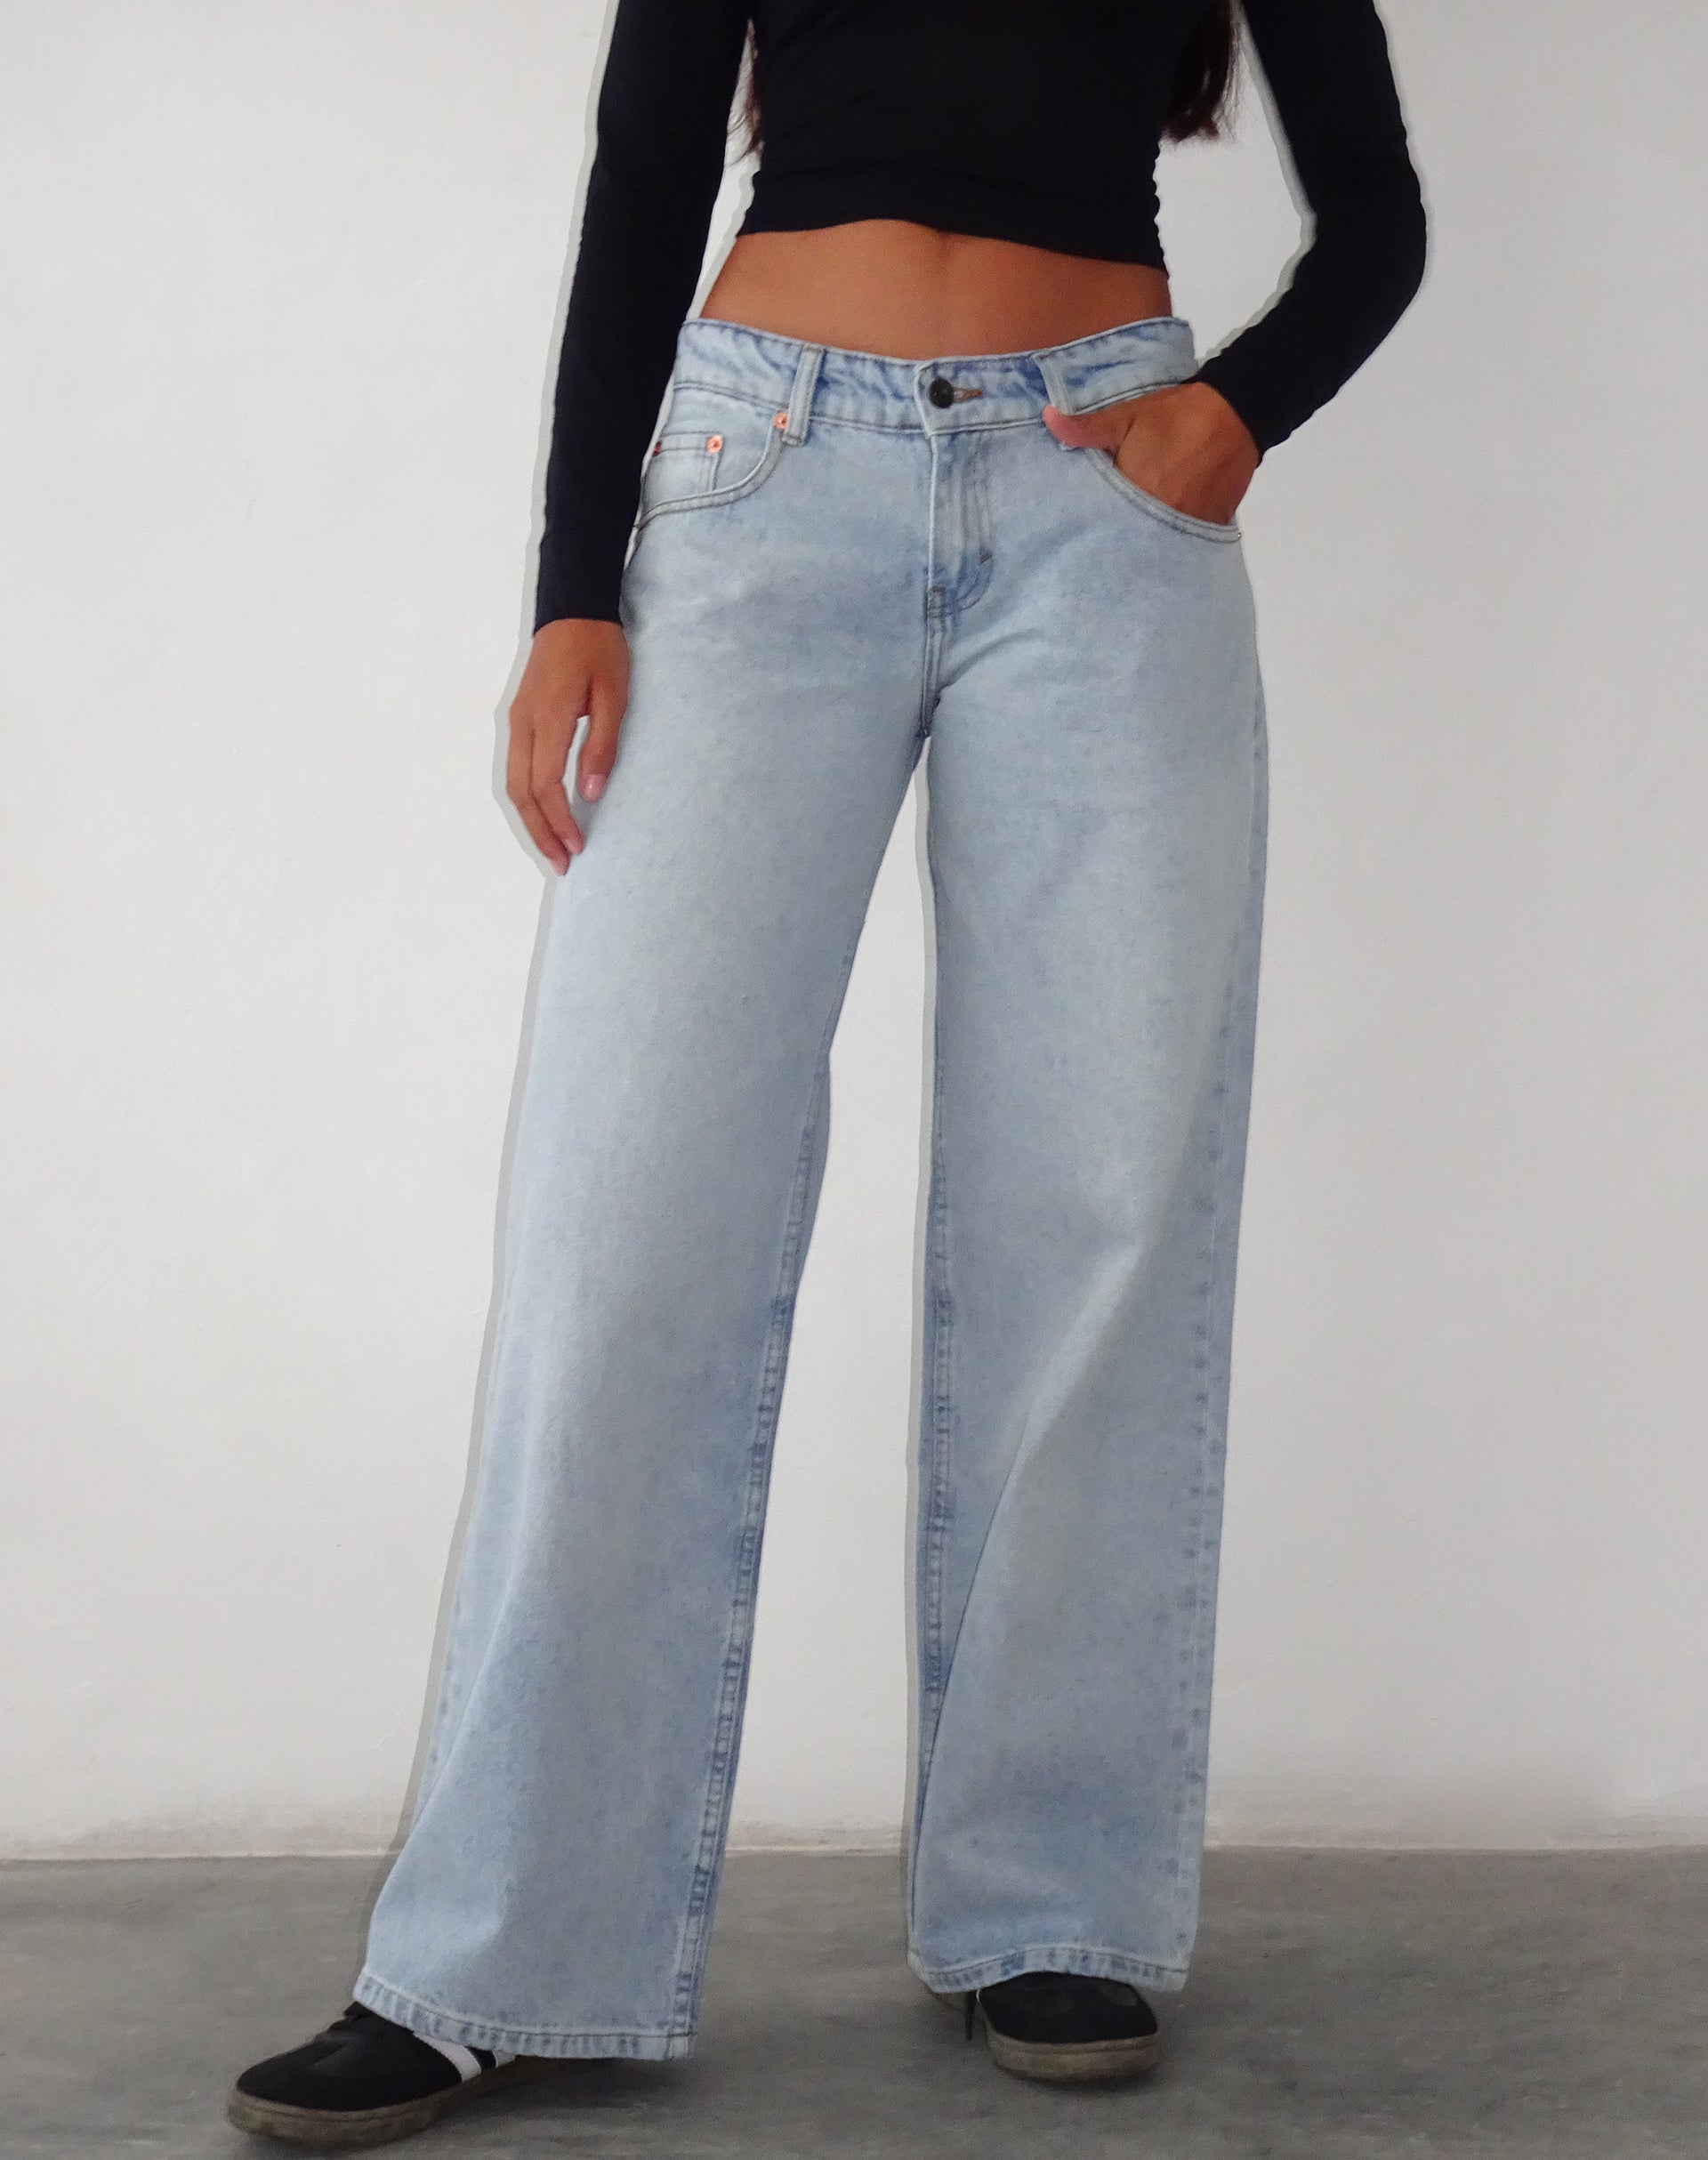 Bild von Roomy Extra Wide Low Rise Jeans in Extreme Light Blue Wash